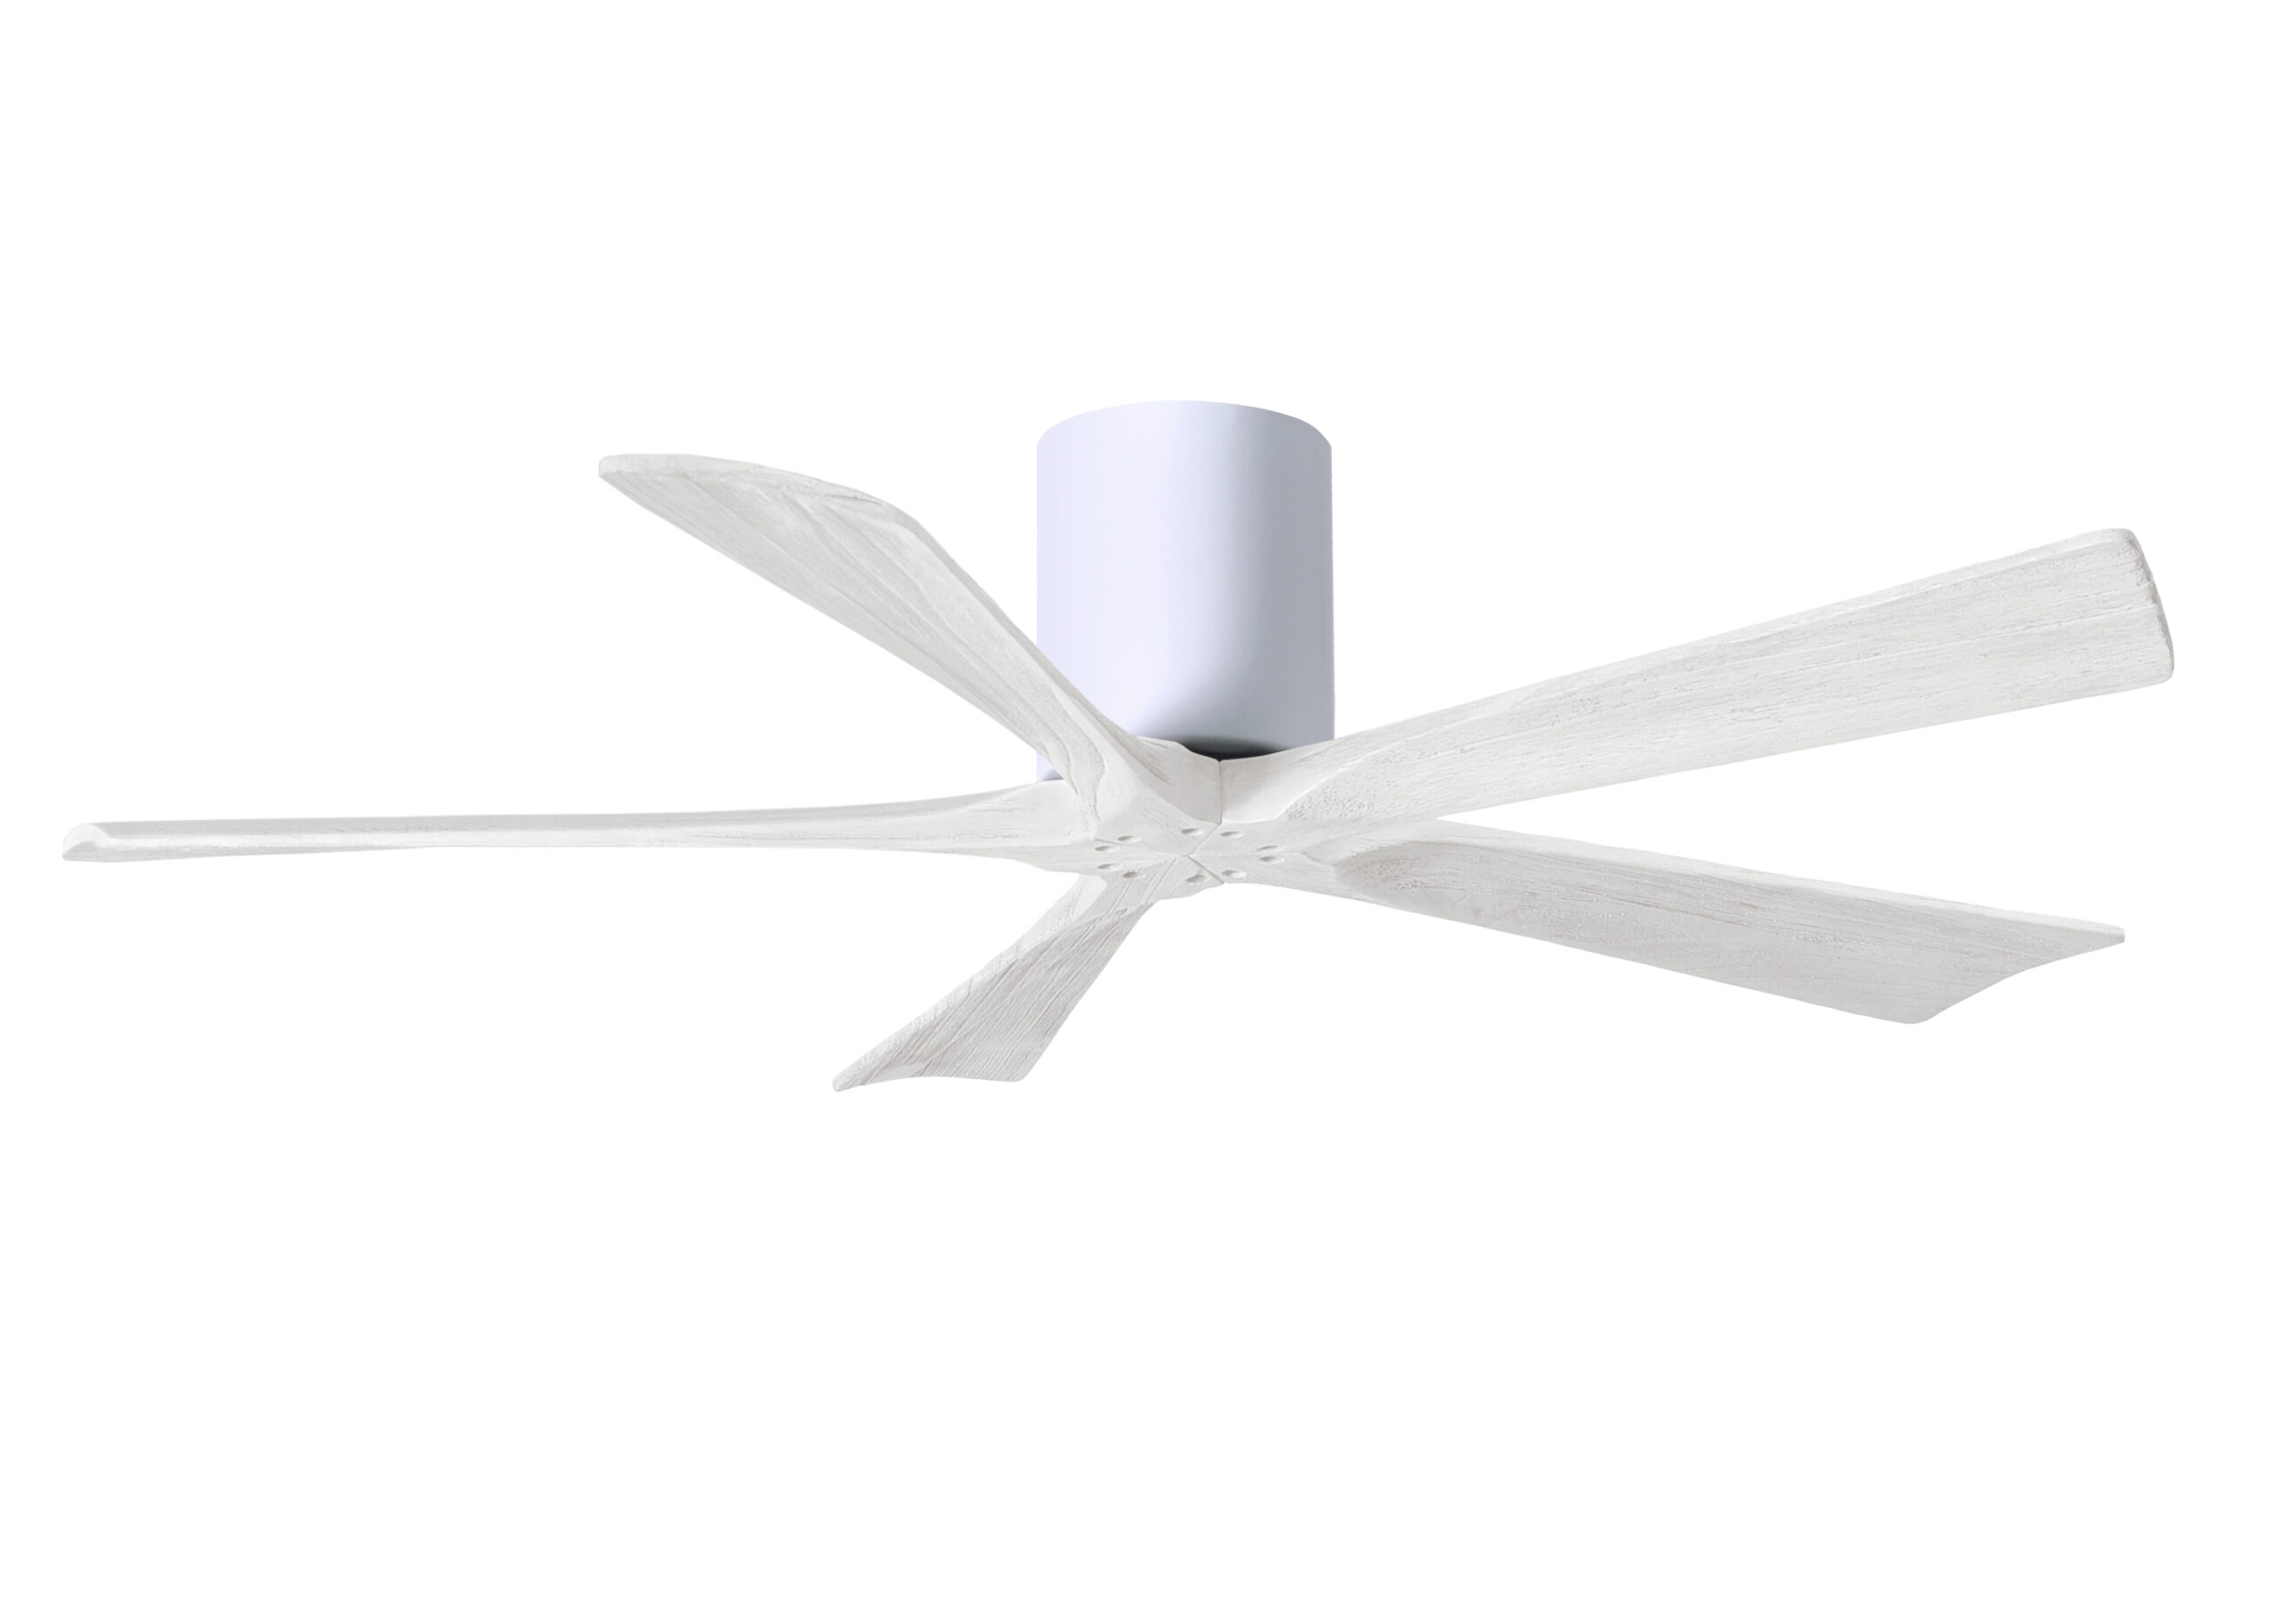 Irene-5H Ceiling Fan in Gloss White Finish with 52